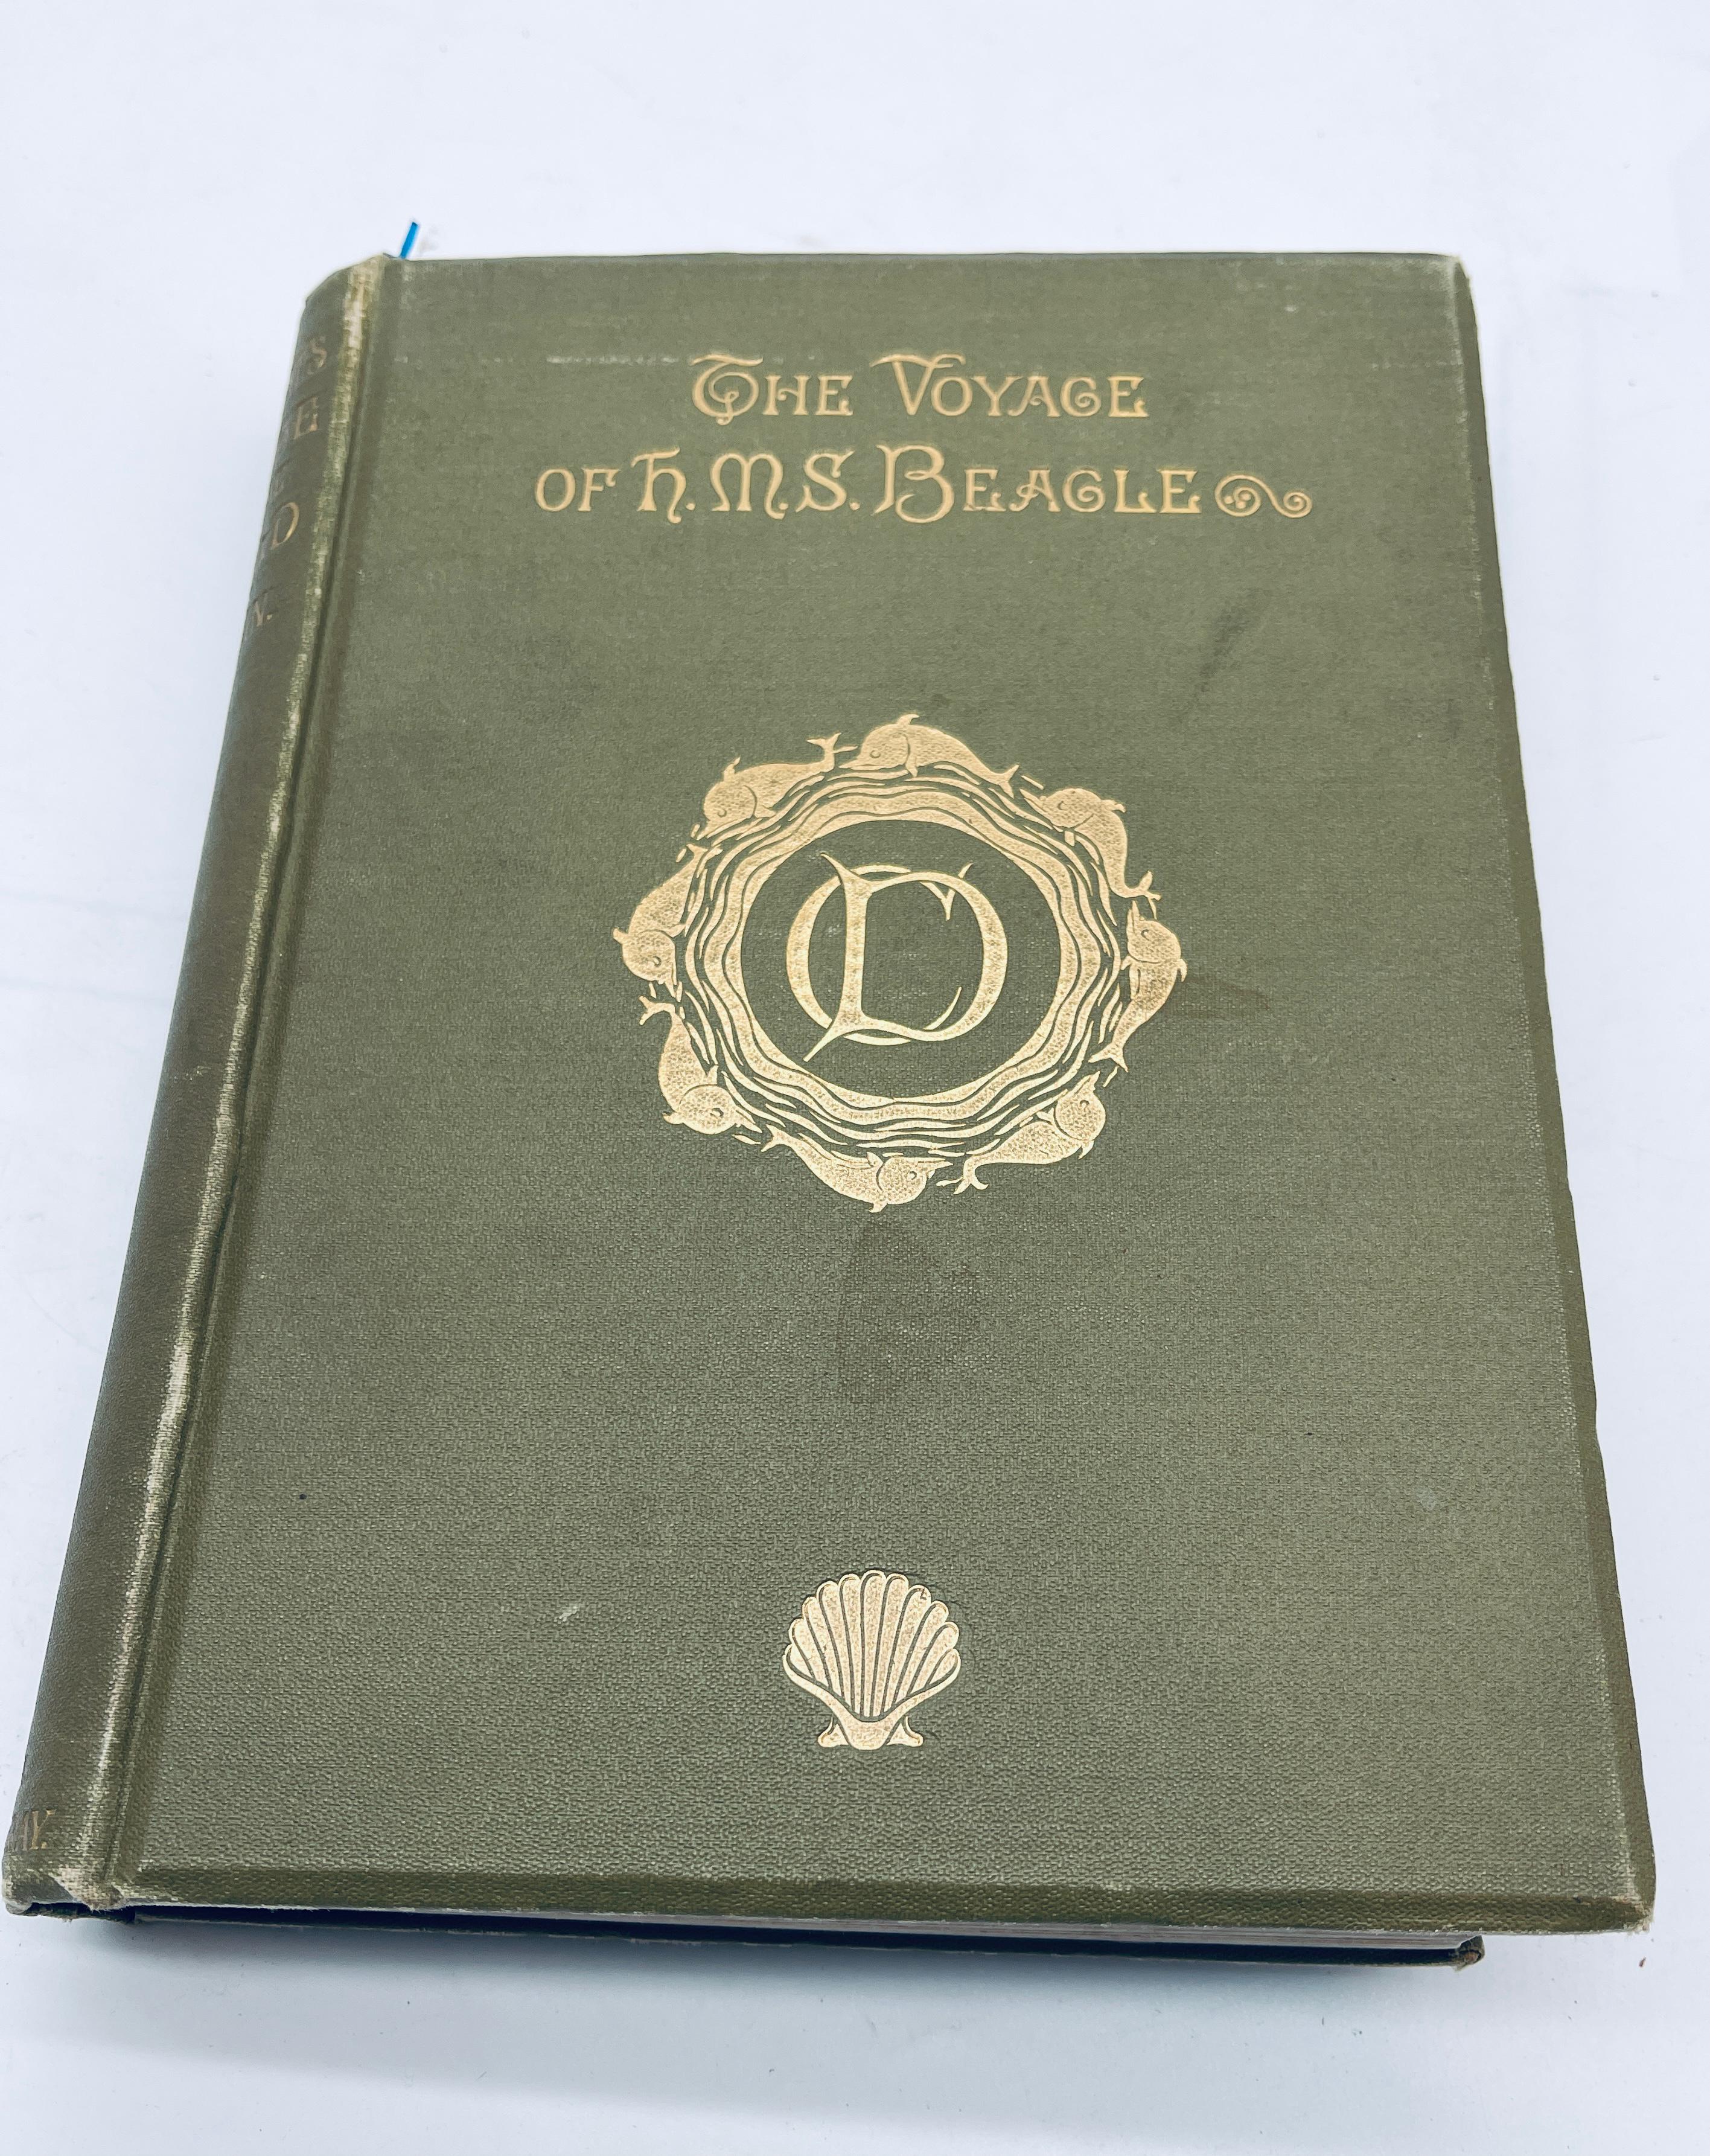 RARE A Naturalist's Voyage. Journal of Researches on HMS Beagle by CHARLES DARWIN (1890)